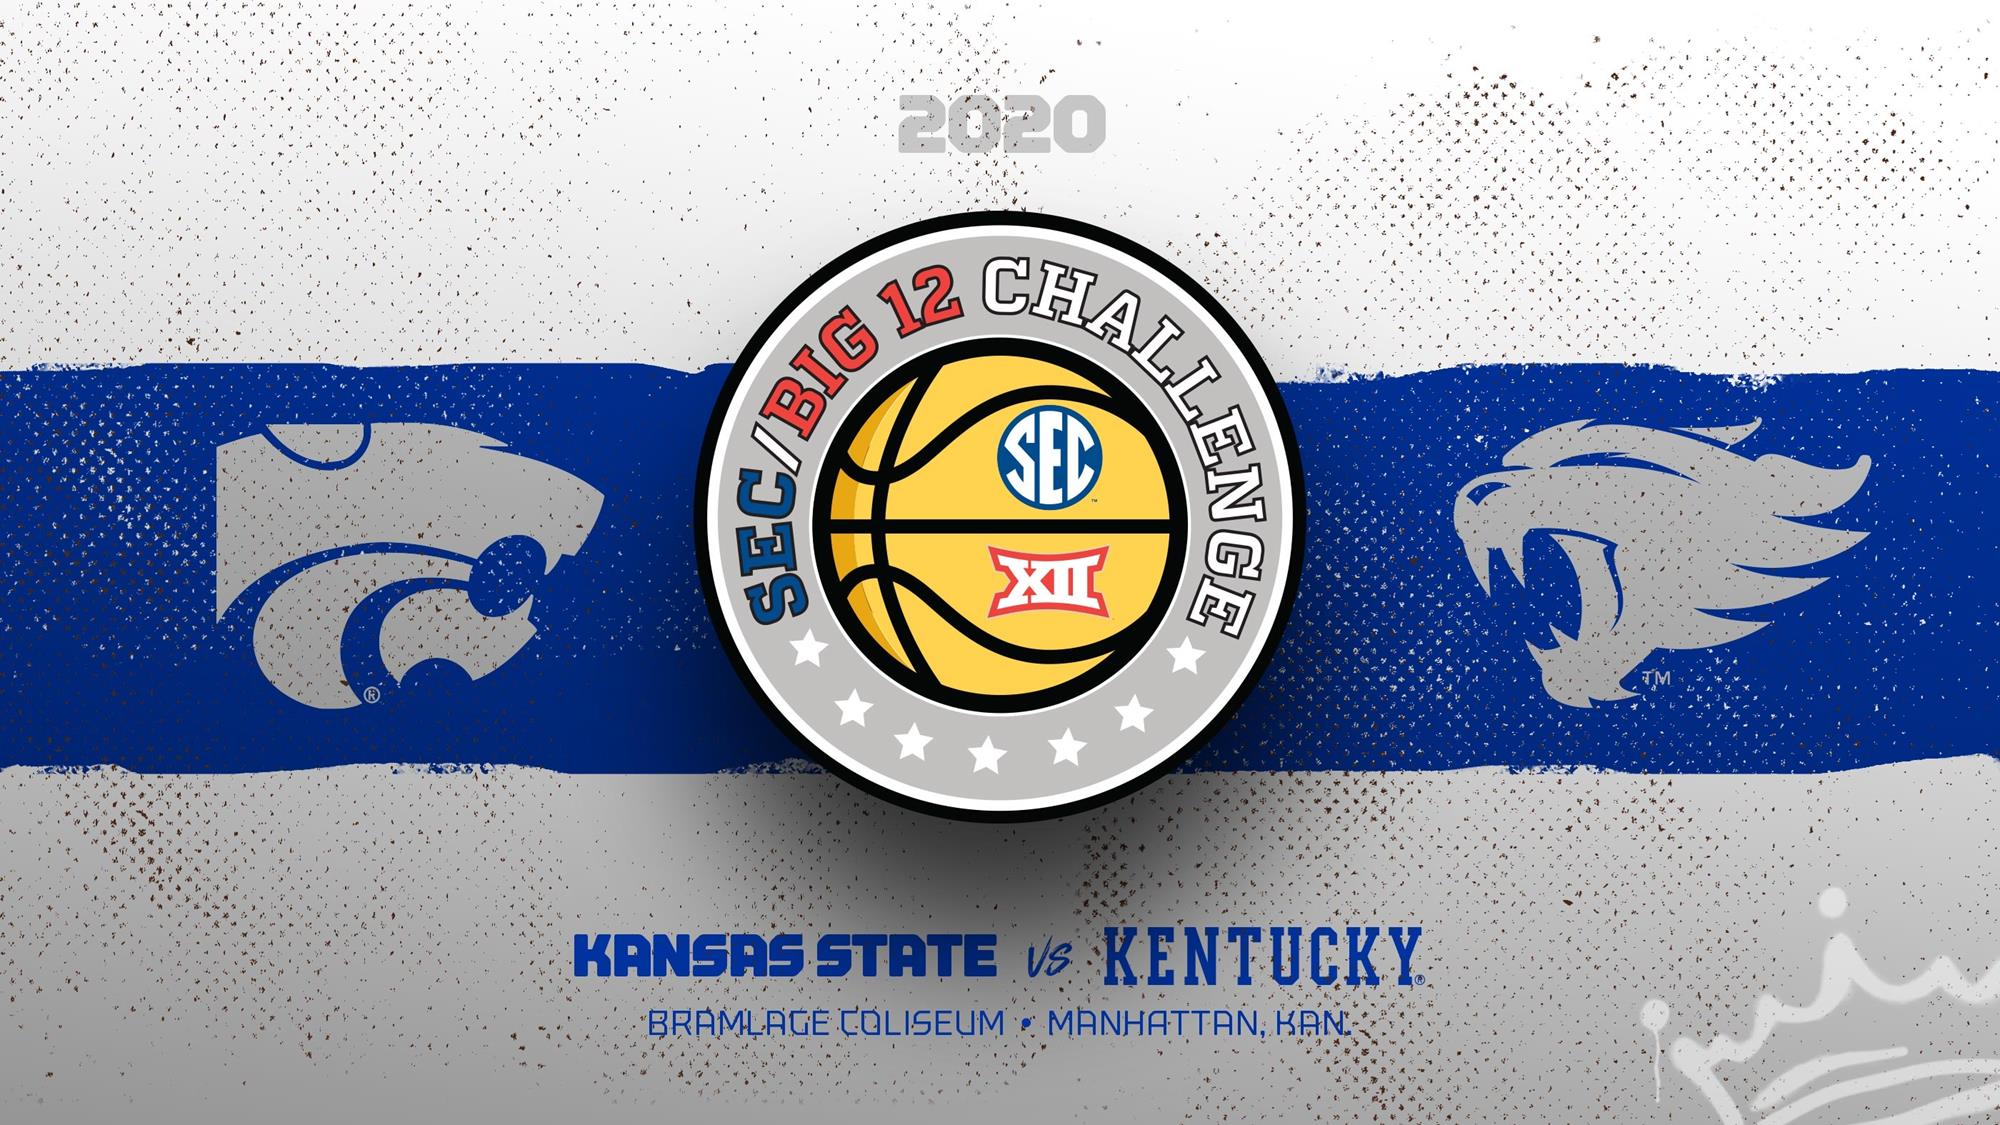 Kentucky to Travel to Kansas State for 2020 SEC/Big 12 Challenge